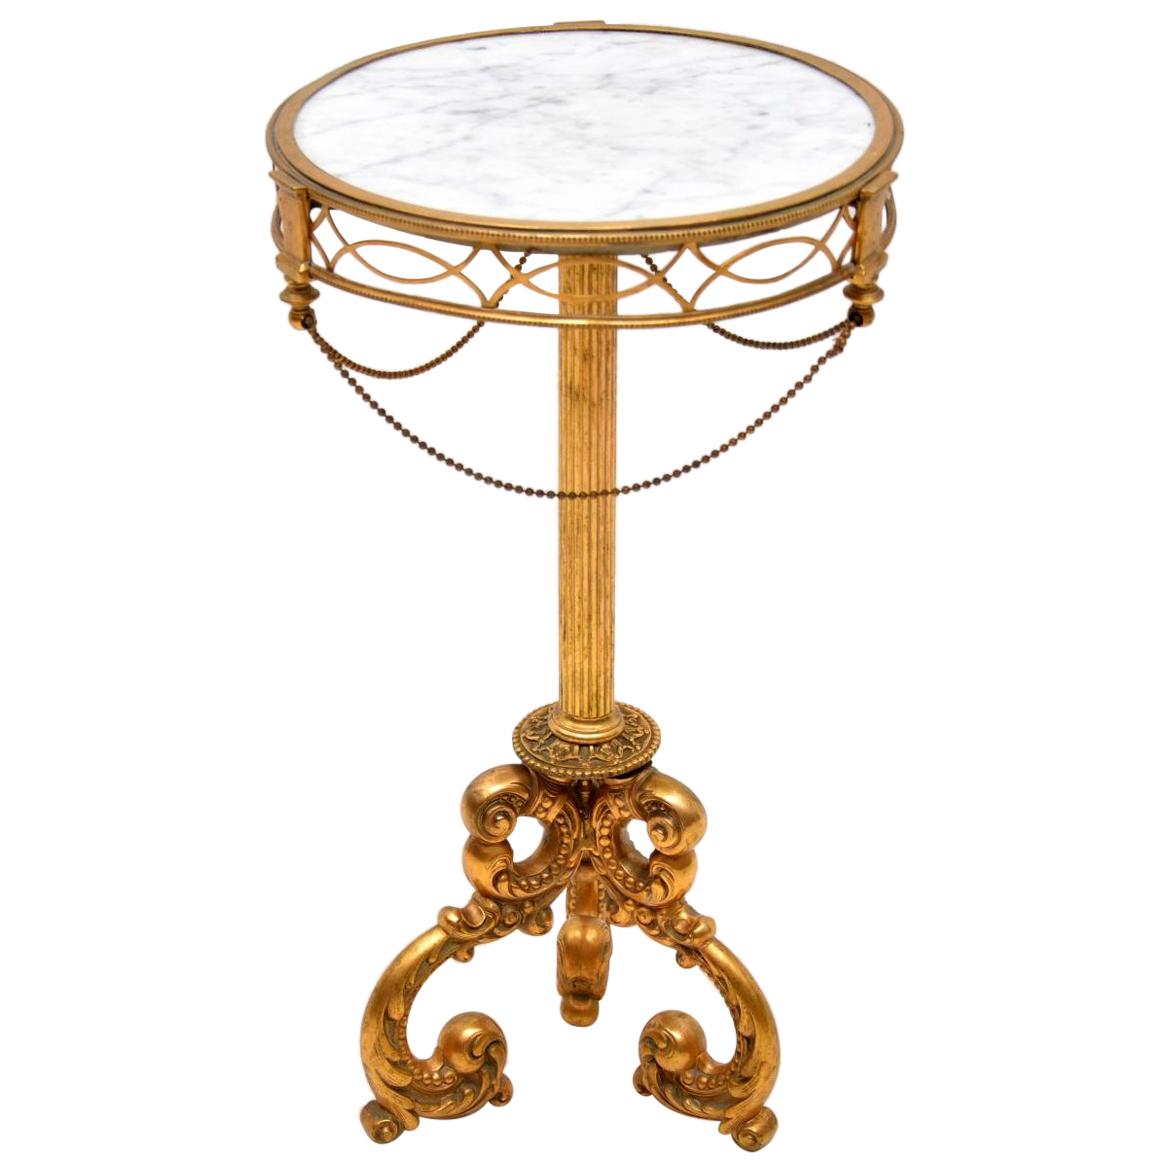 Antique Gilt Metal and Marble Side Table